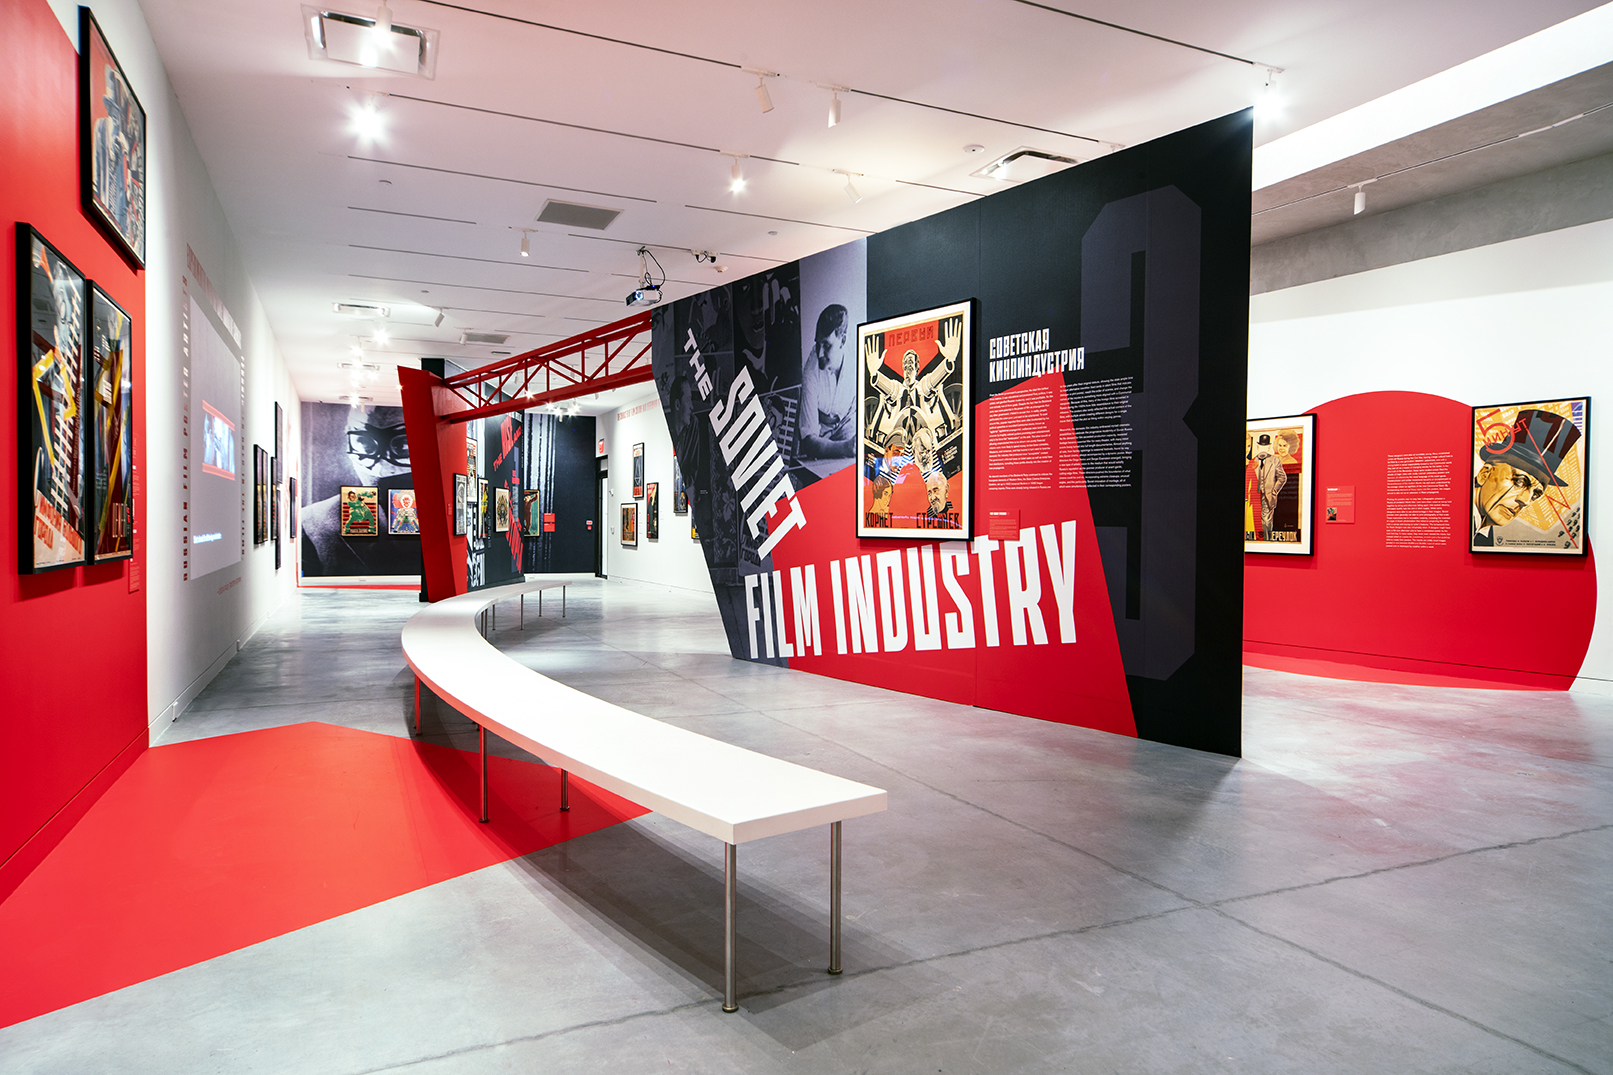 A bench swinging through two freestanding walls and connected by a red industrial beam in a soviet poster show.